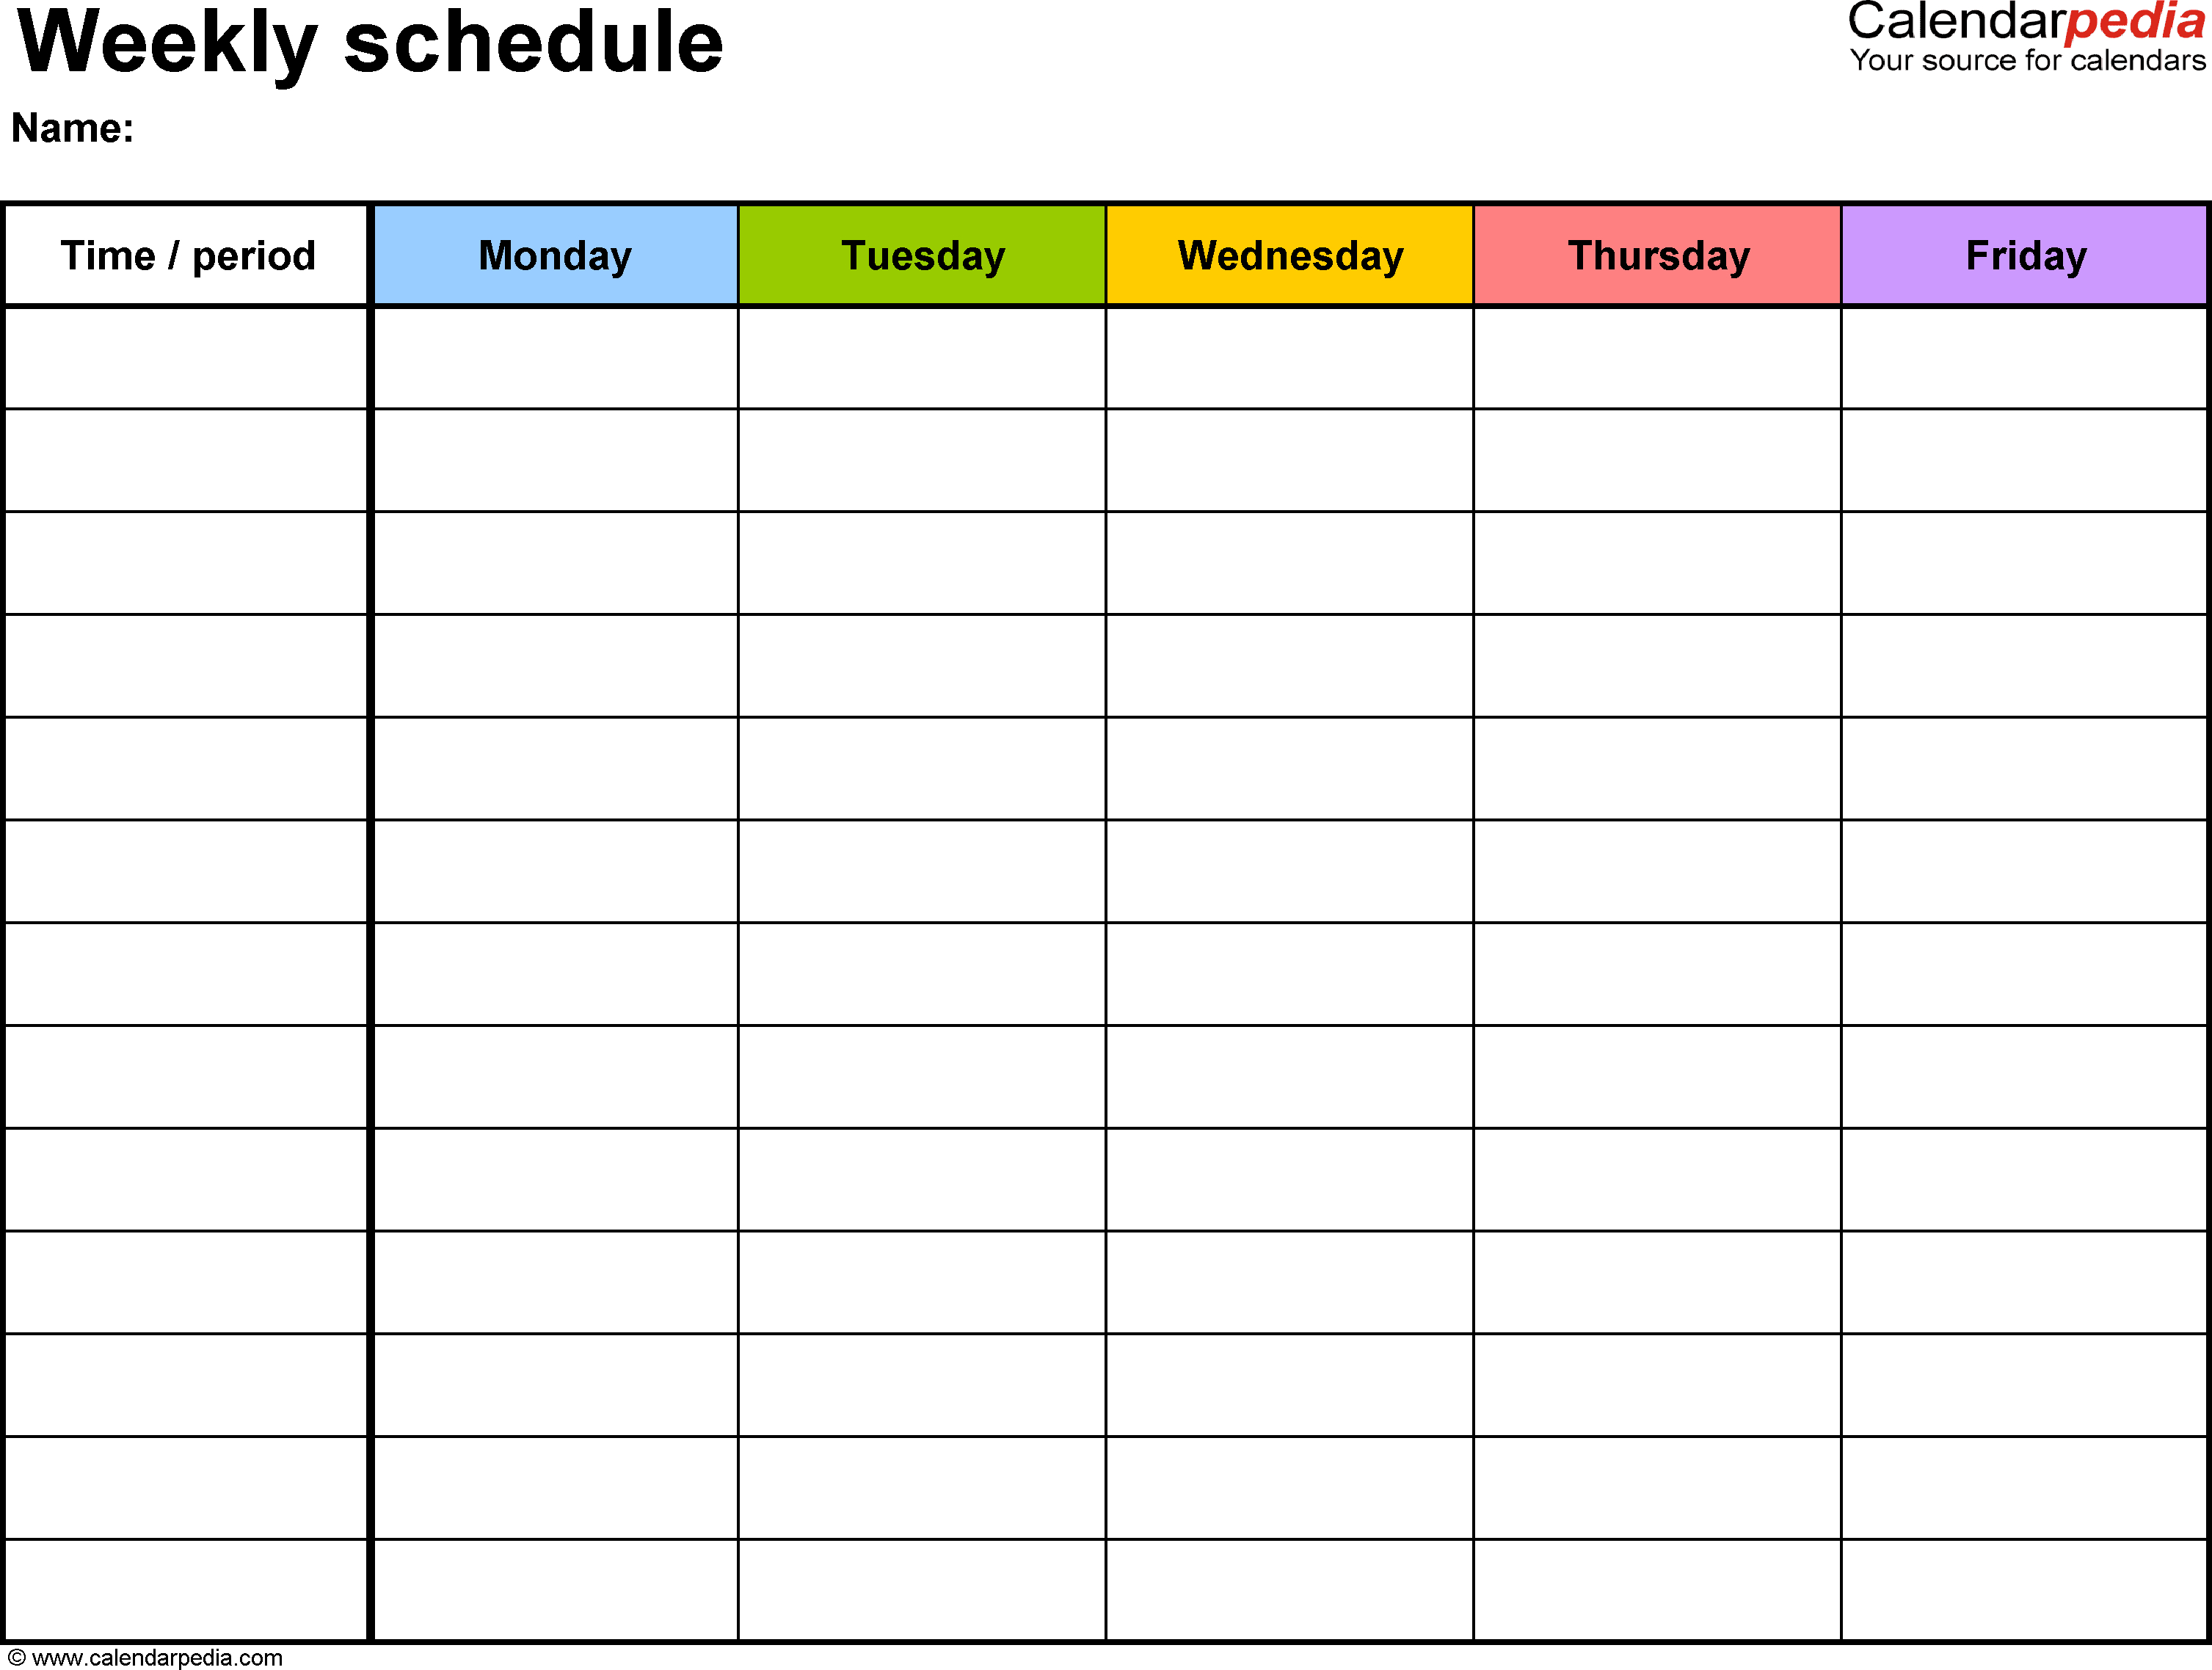 Free Weekly Schedule Templates For Pdf - 18 Templates - Free Printable Weekly Planner